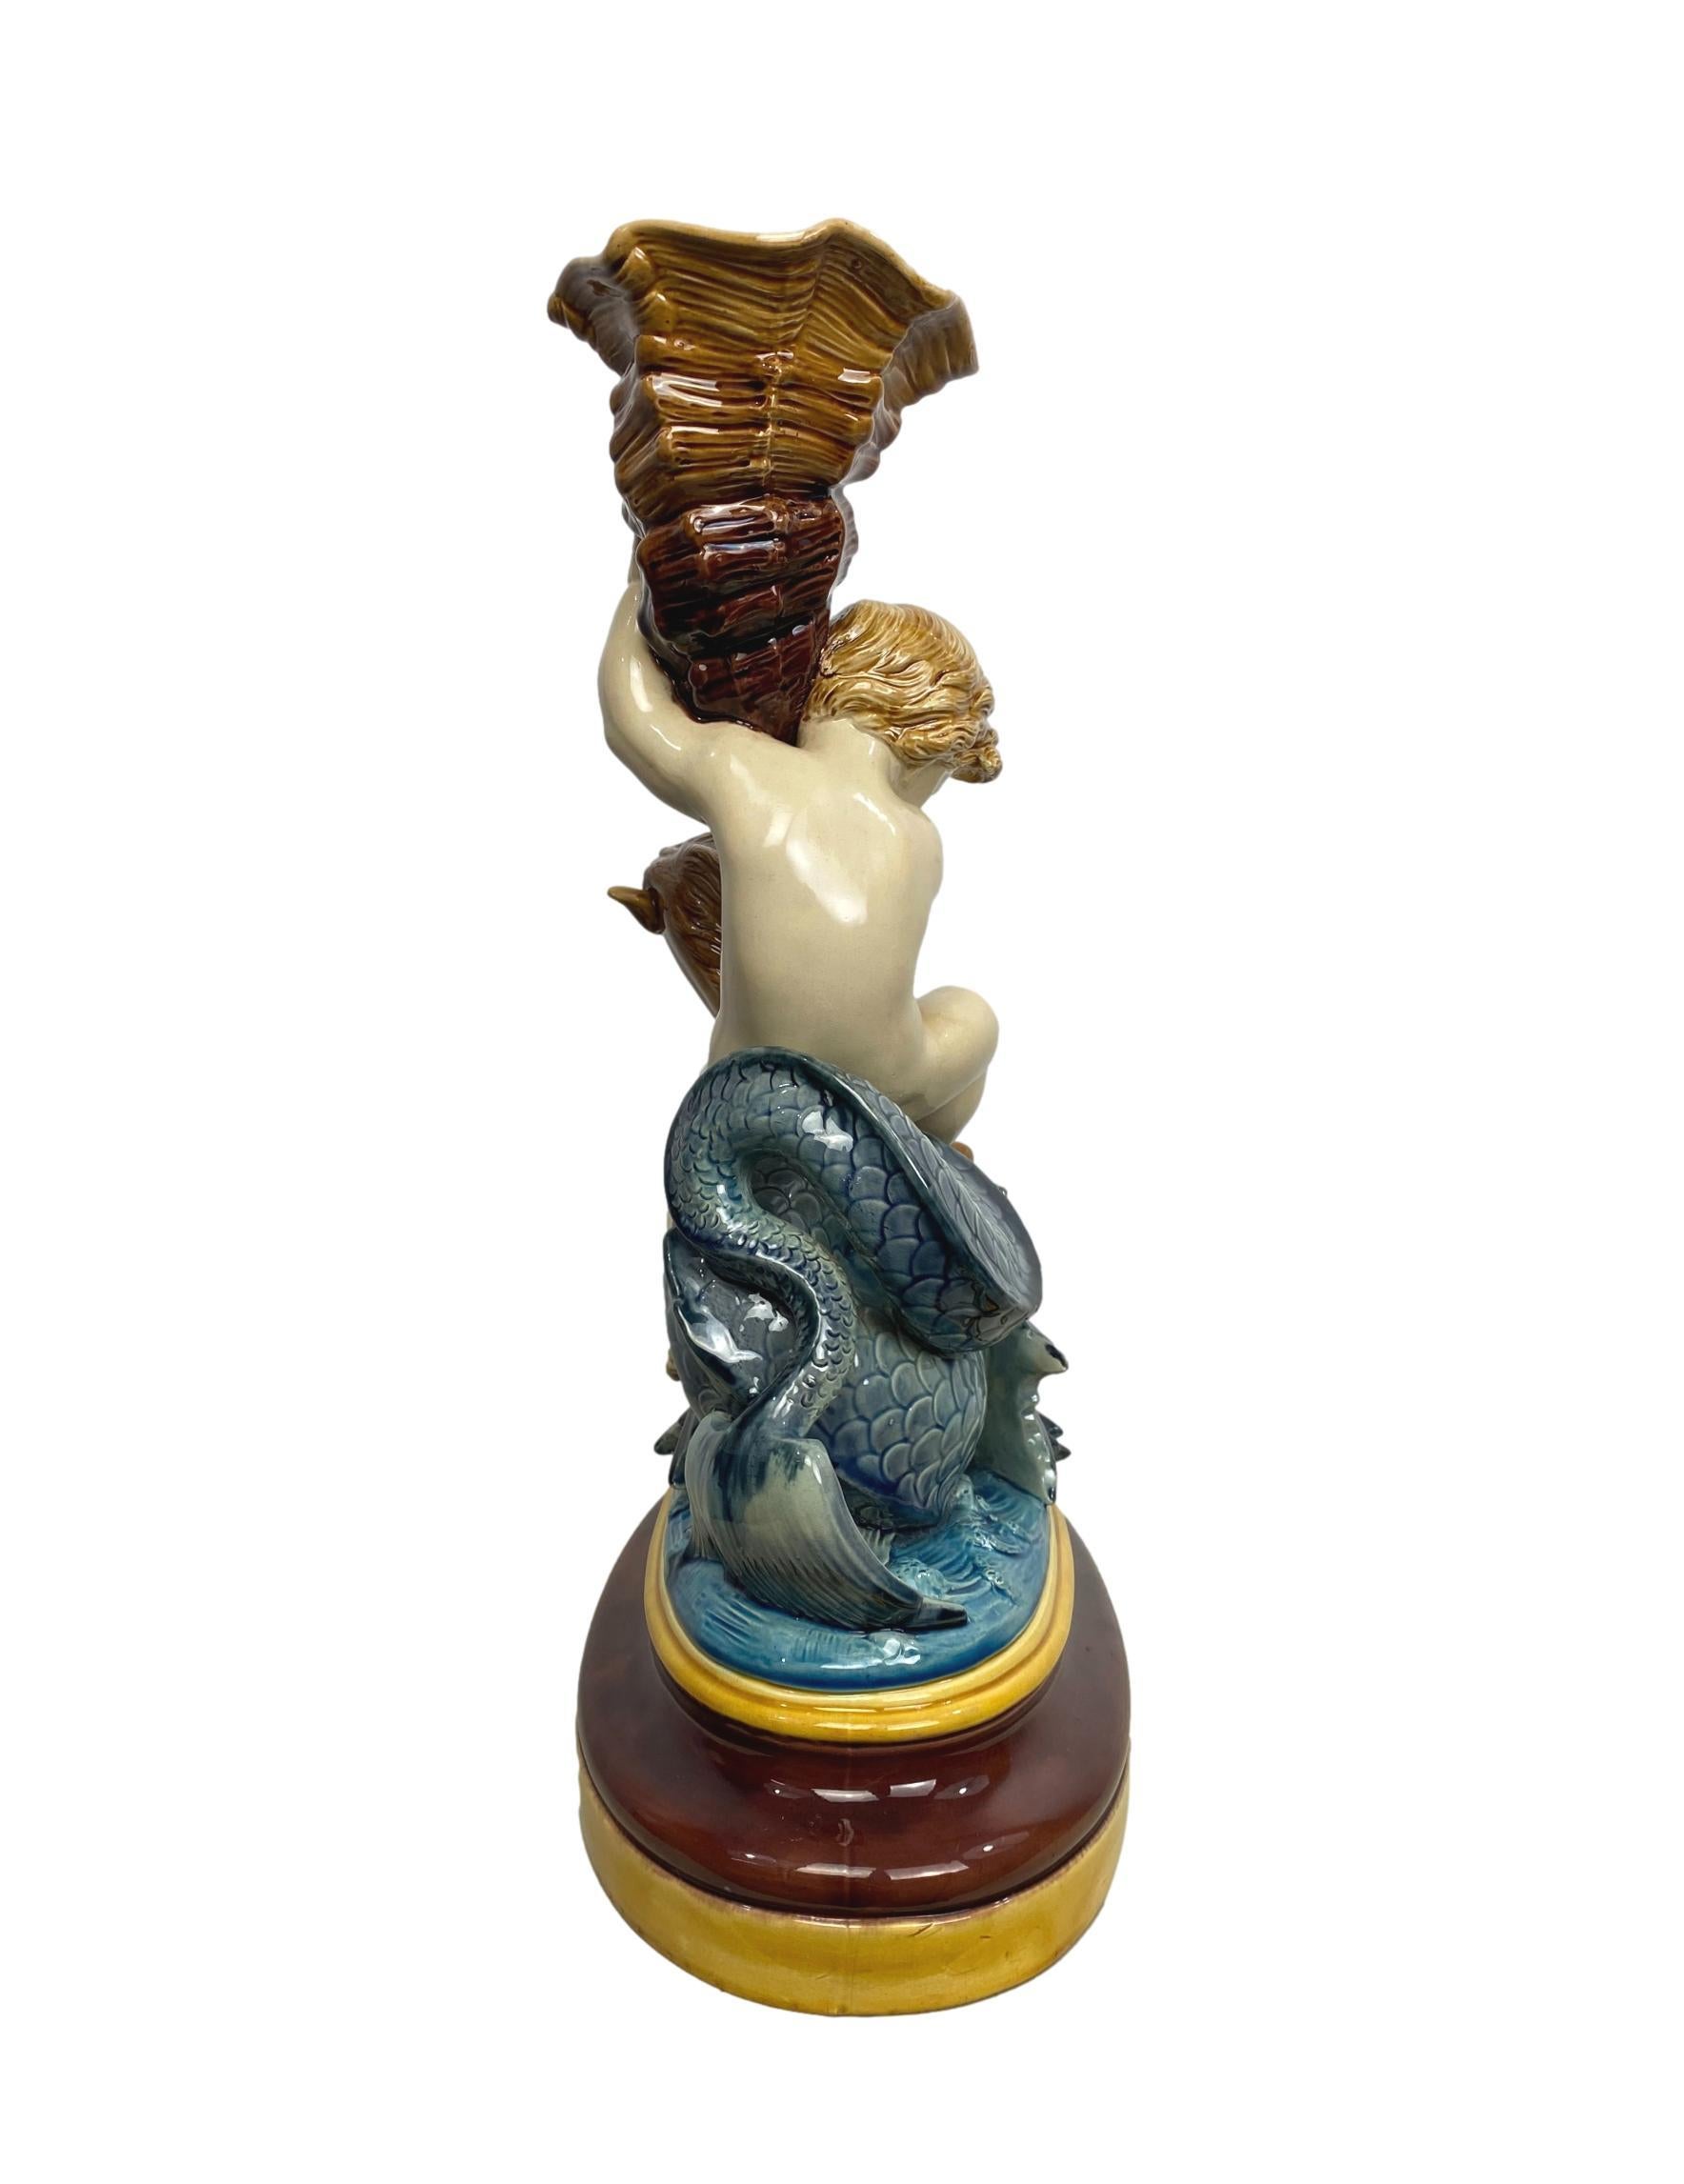 Molded Minton Majolica Centerpiece Putto Riding Winged Seahorse, Dated 1864, H-17ins